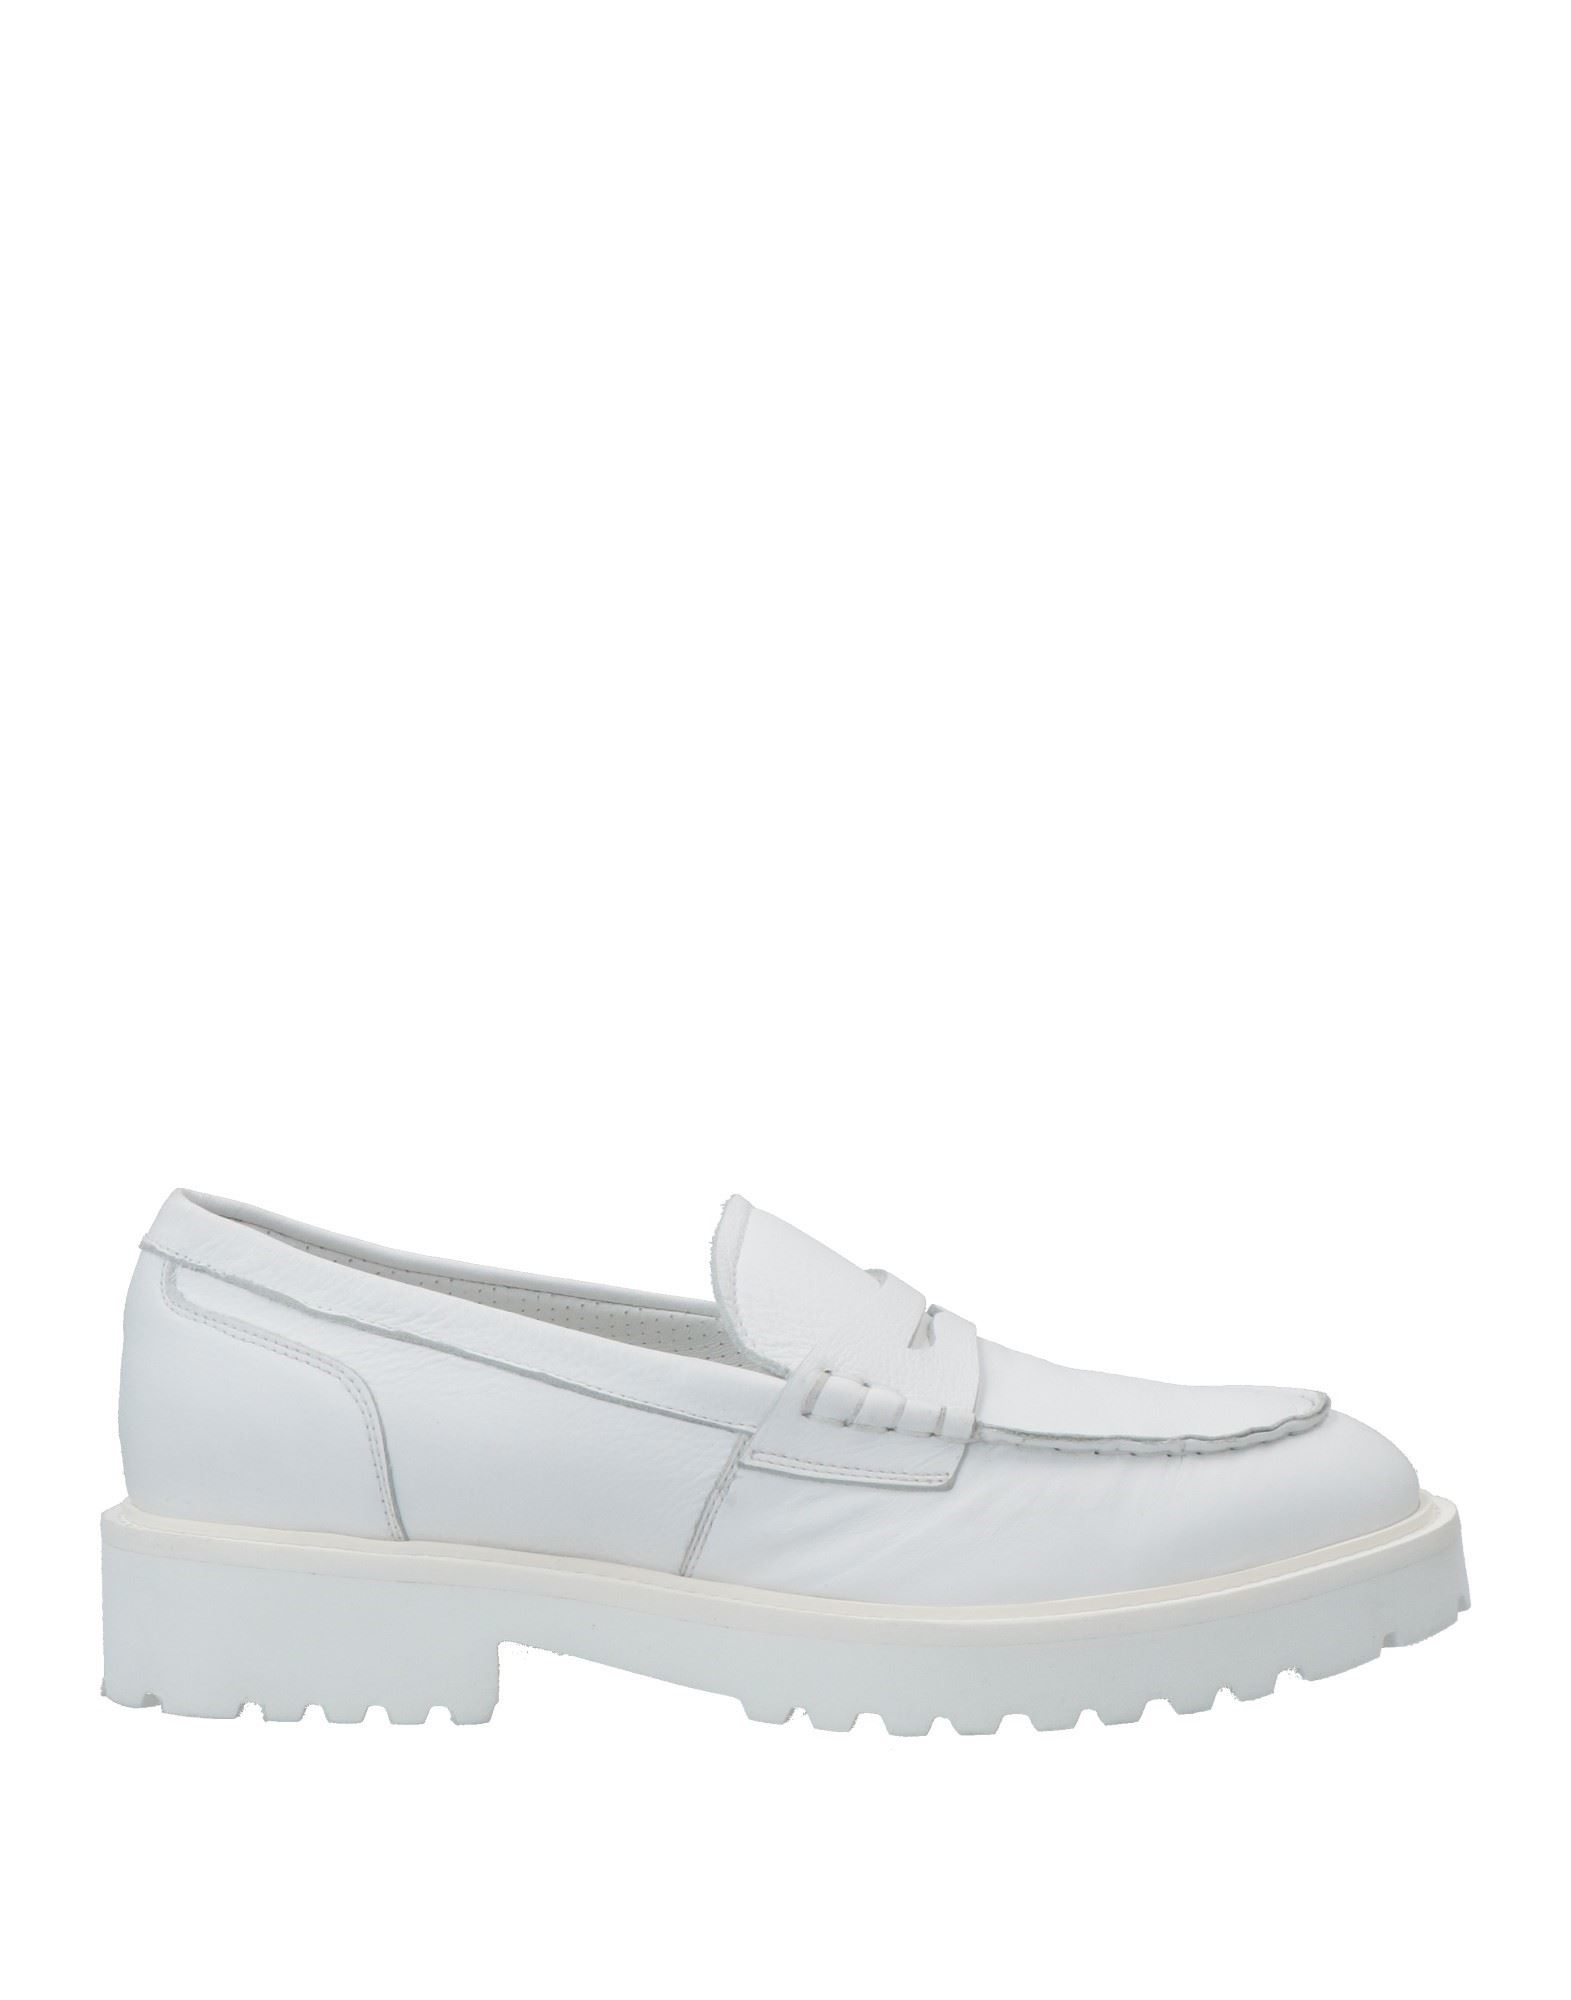 Doucal's Woman Loafers White Size 9 Soft Leather